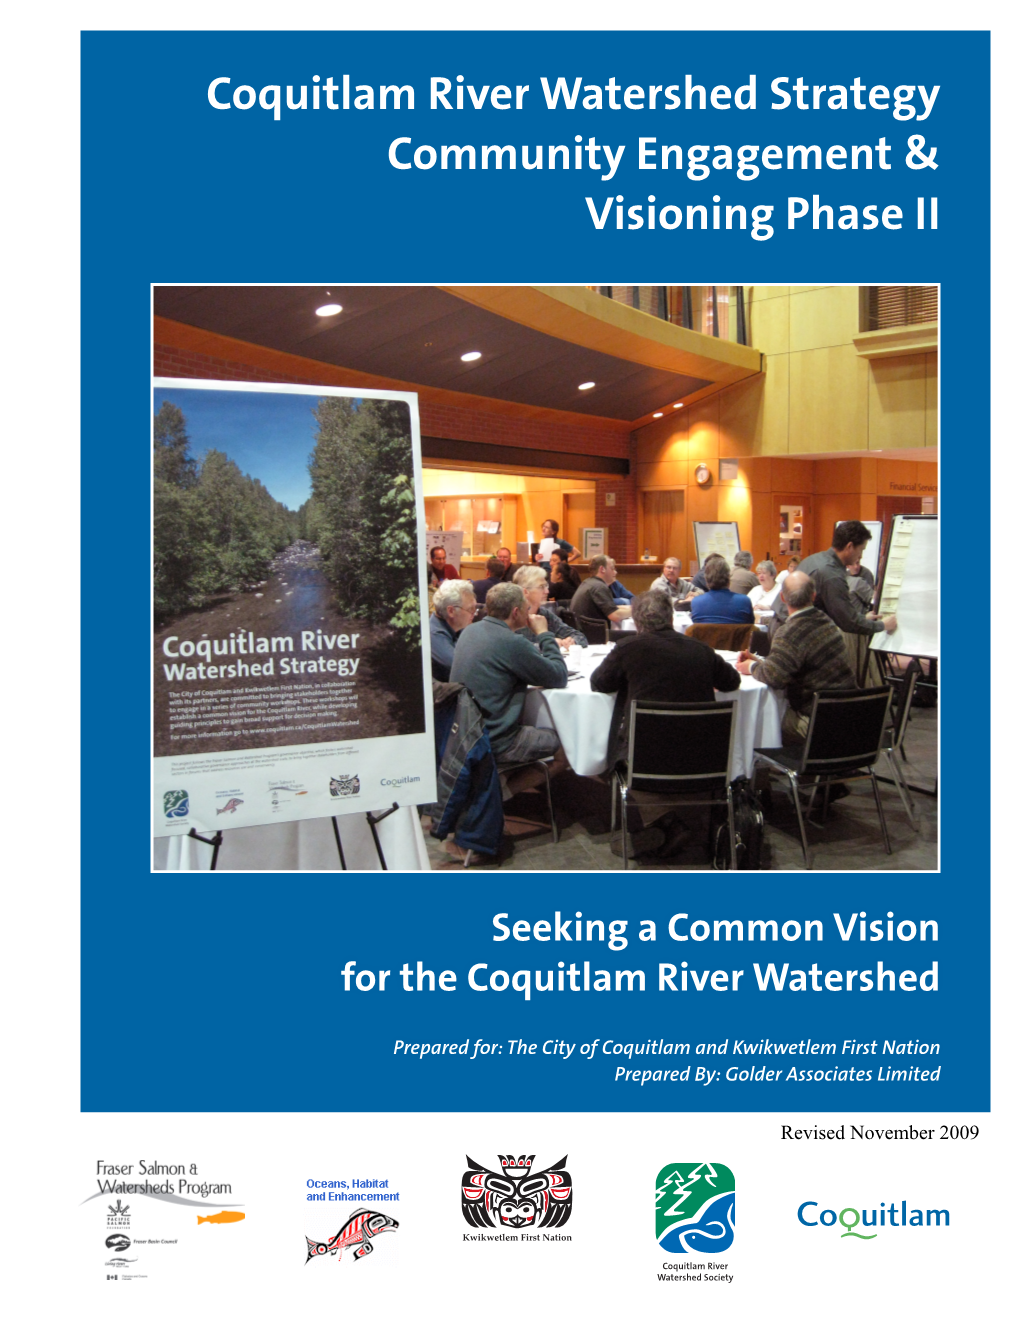 Coquitlam River Watershed Strategy Community Engagement & Visioning Phase II